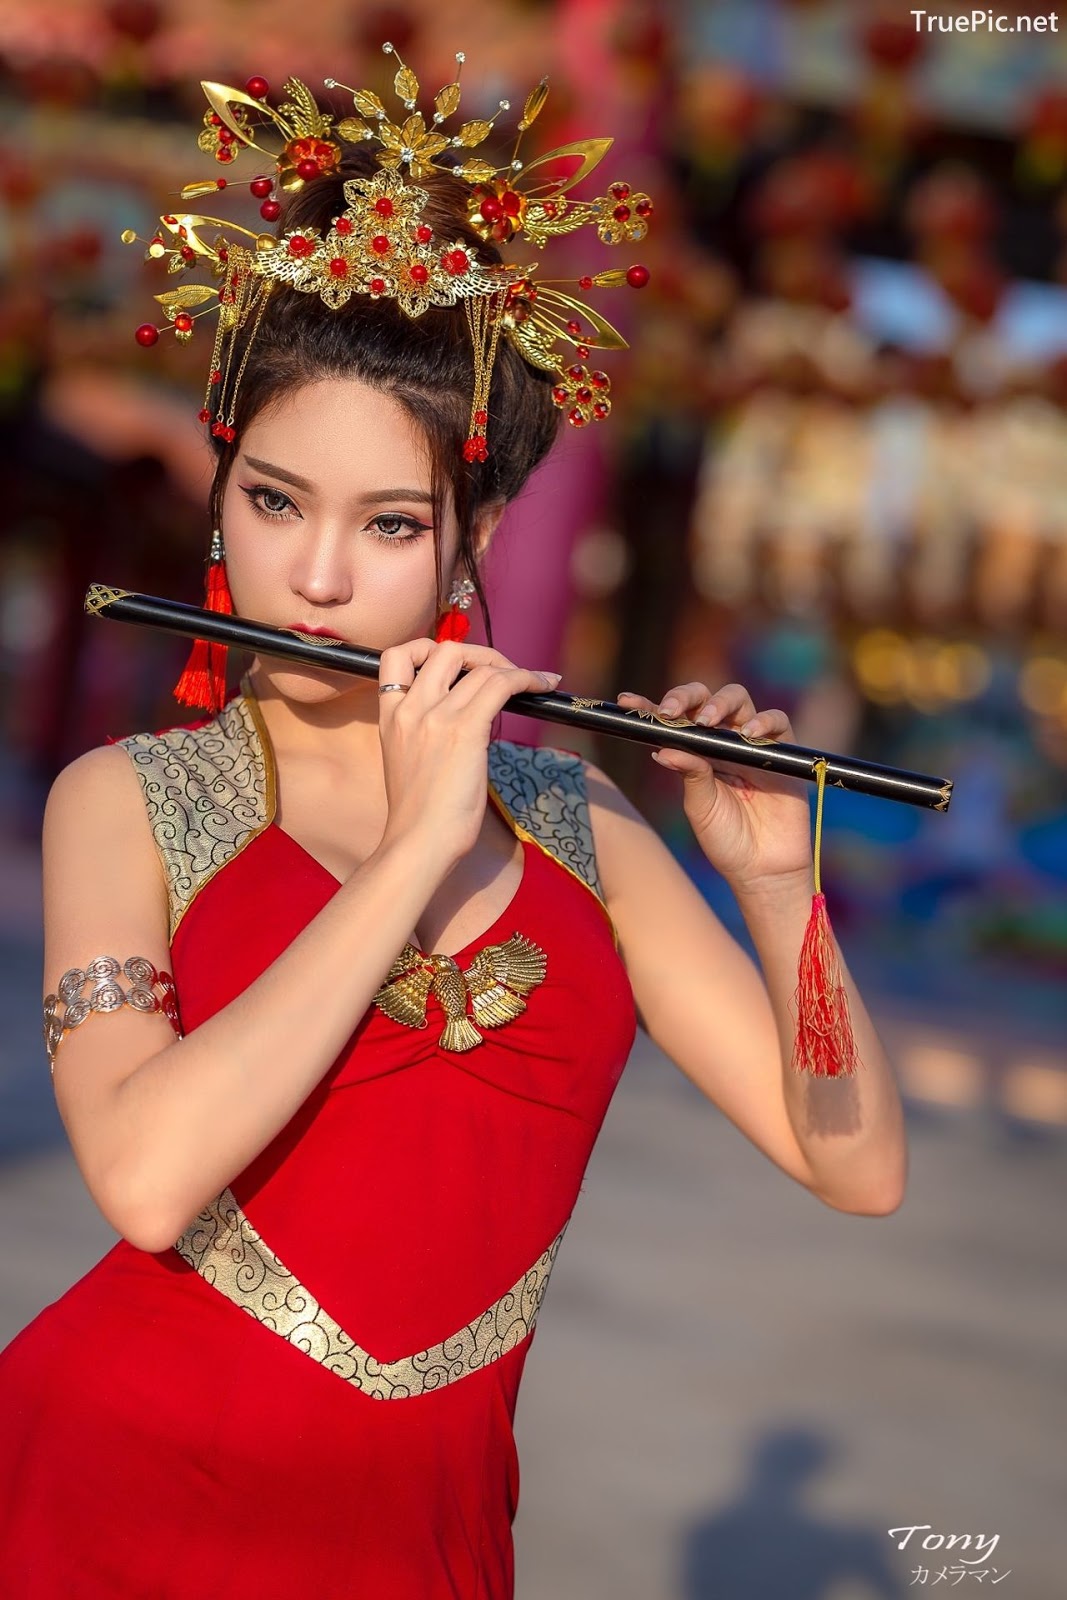 Image-Thailand-Hot-Model-Janet-Kanokwan-Saesim-Sexy-Chinese-Girl-Red-Dress-Traditional-TruePic.net- Picture-23